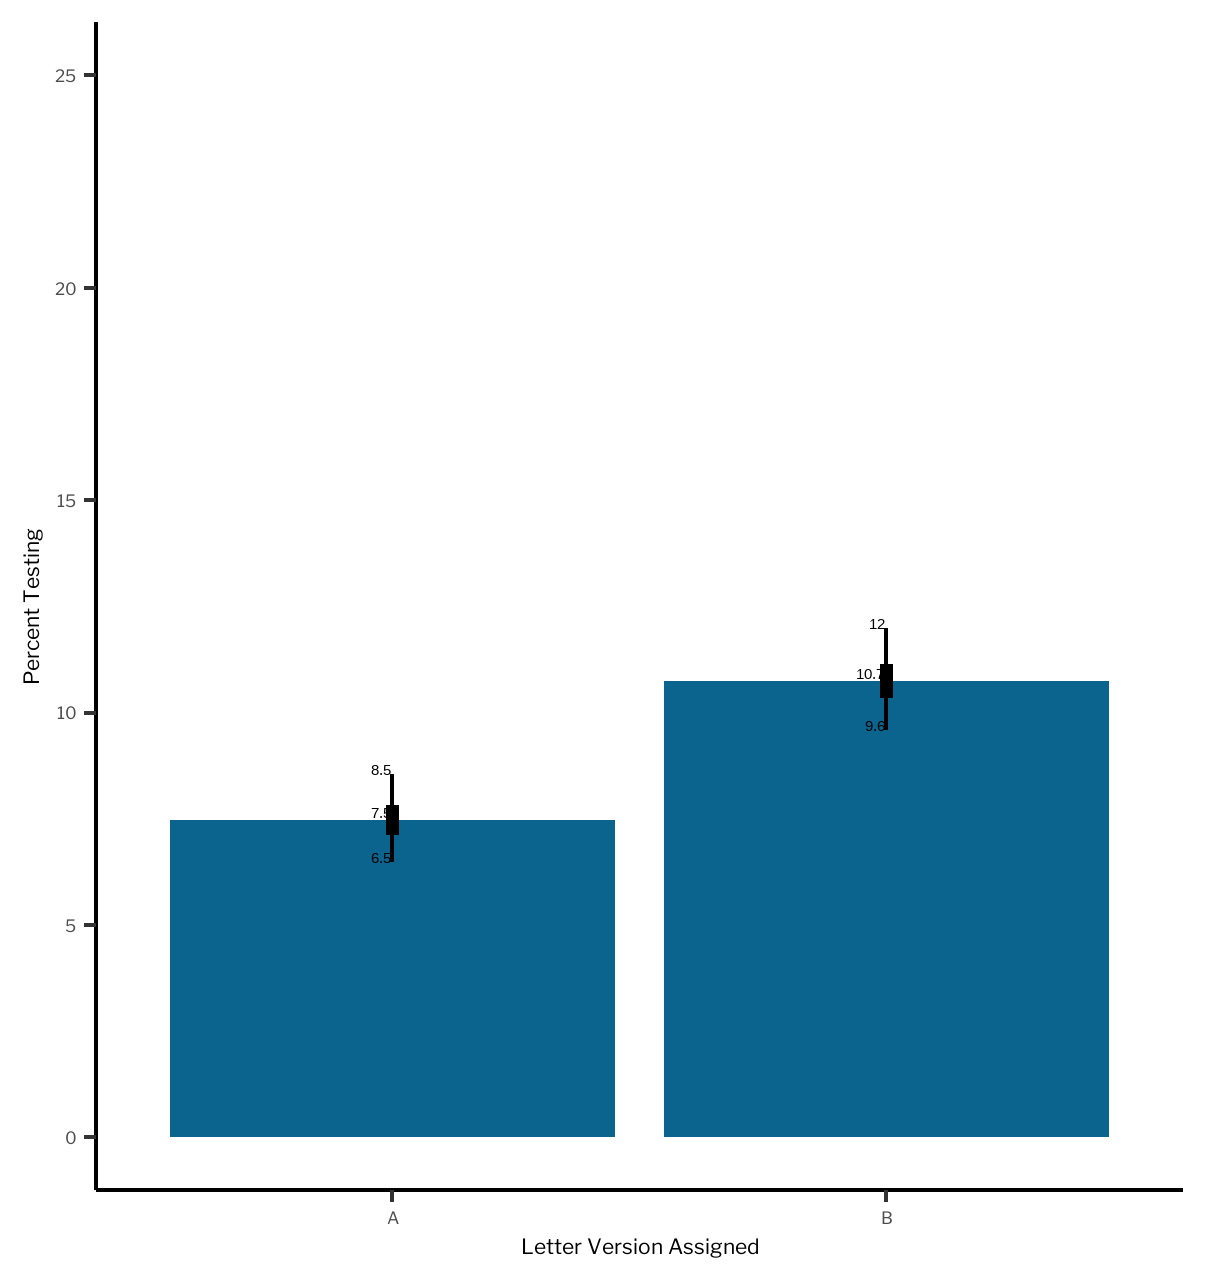 Bar chart with error bars showing a 3.3 percentage point improvement from Letter B